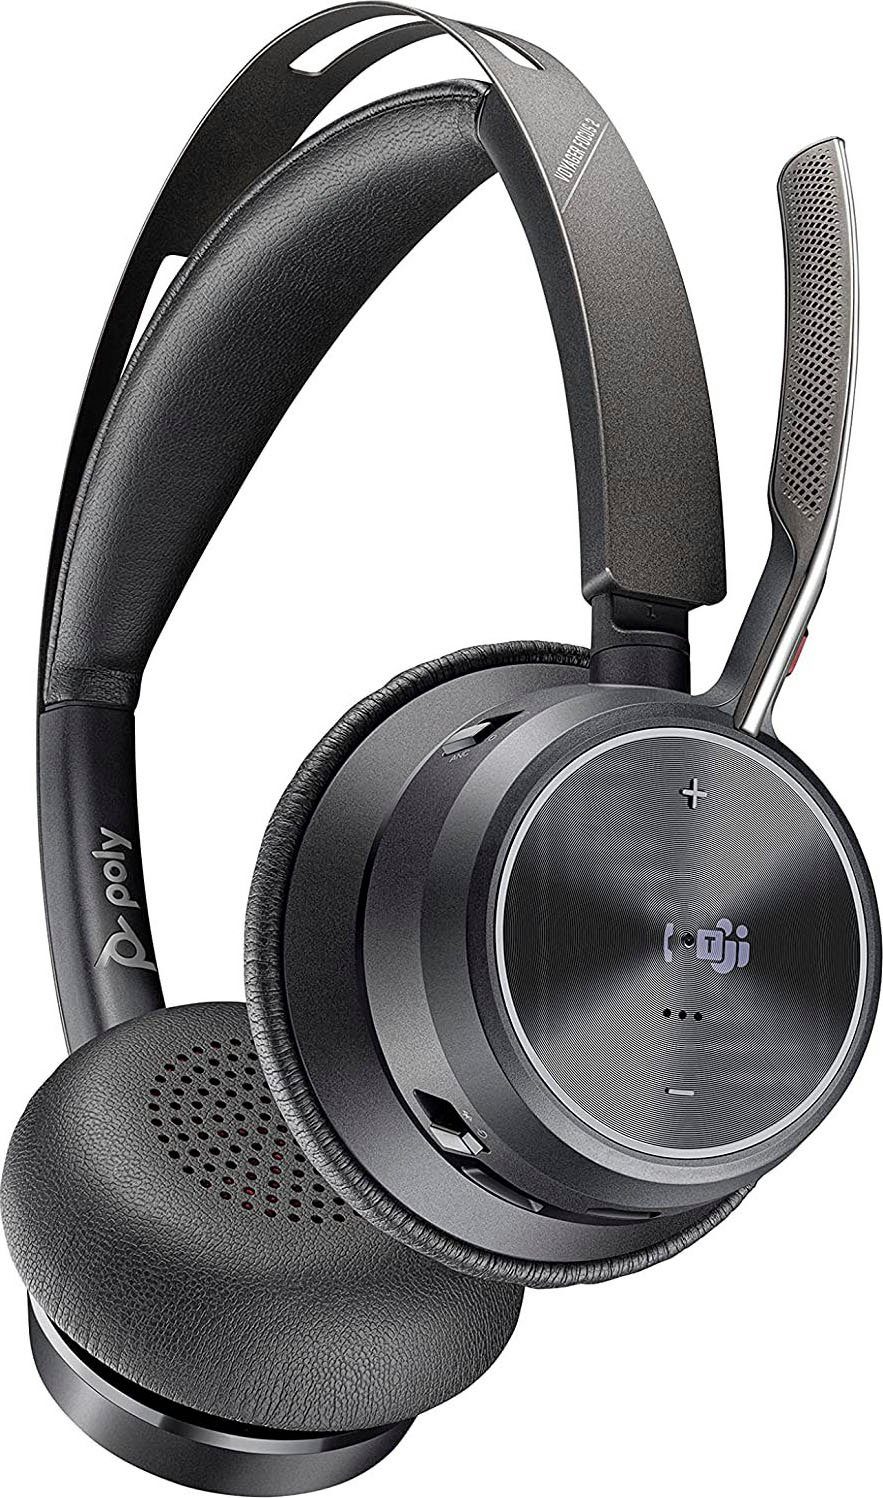 Poly Voyager Focus UC (Noise-Cancelling, Bluetooth) Wireless-Headset